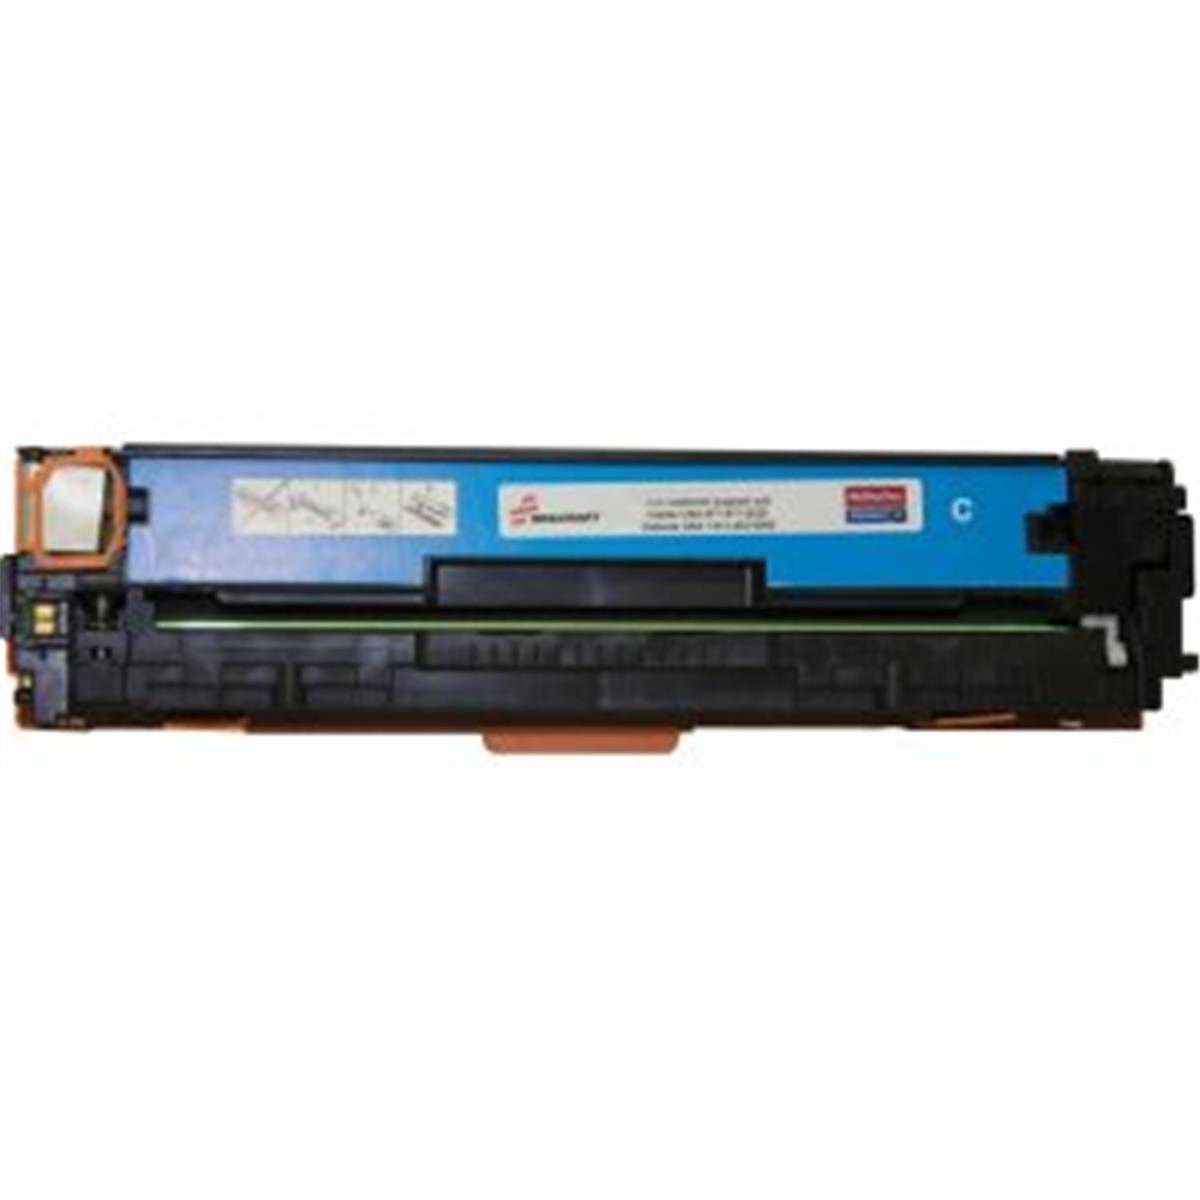 Picture of Abilityone AB16703777 Alternative 304A Standard Cyan Toner Cartridge for HP Color LaserJet CP2025